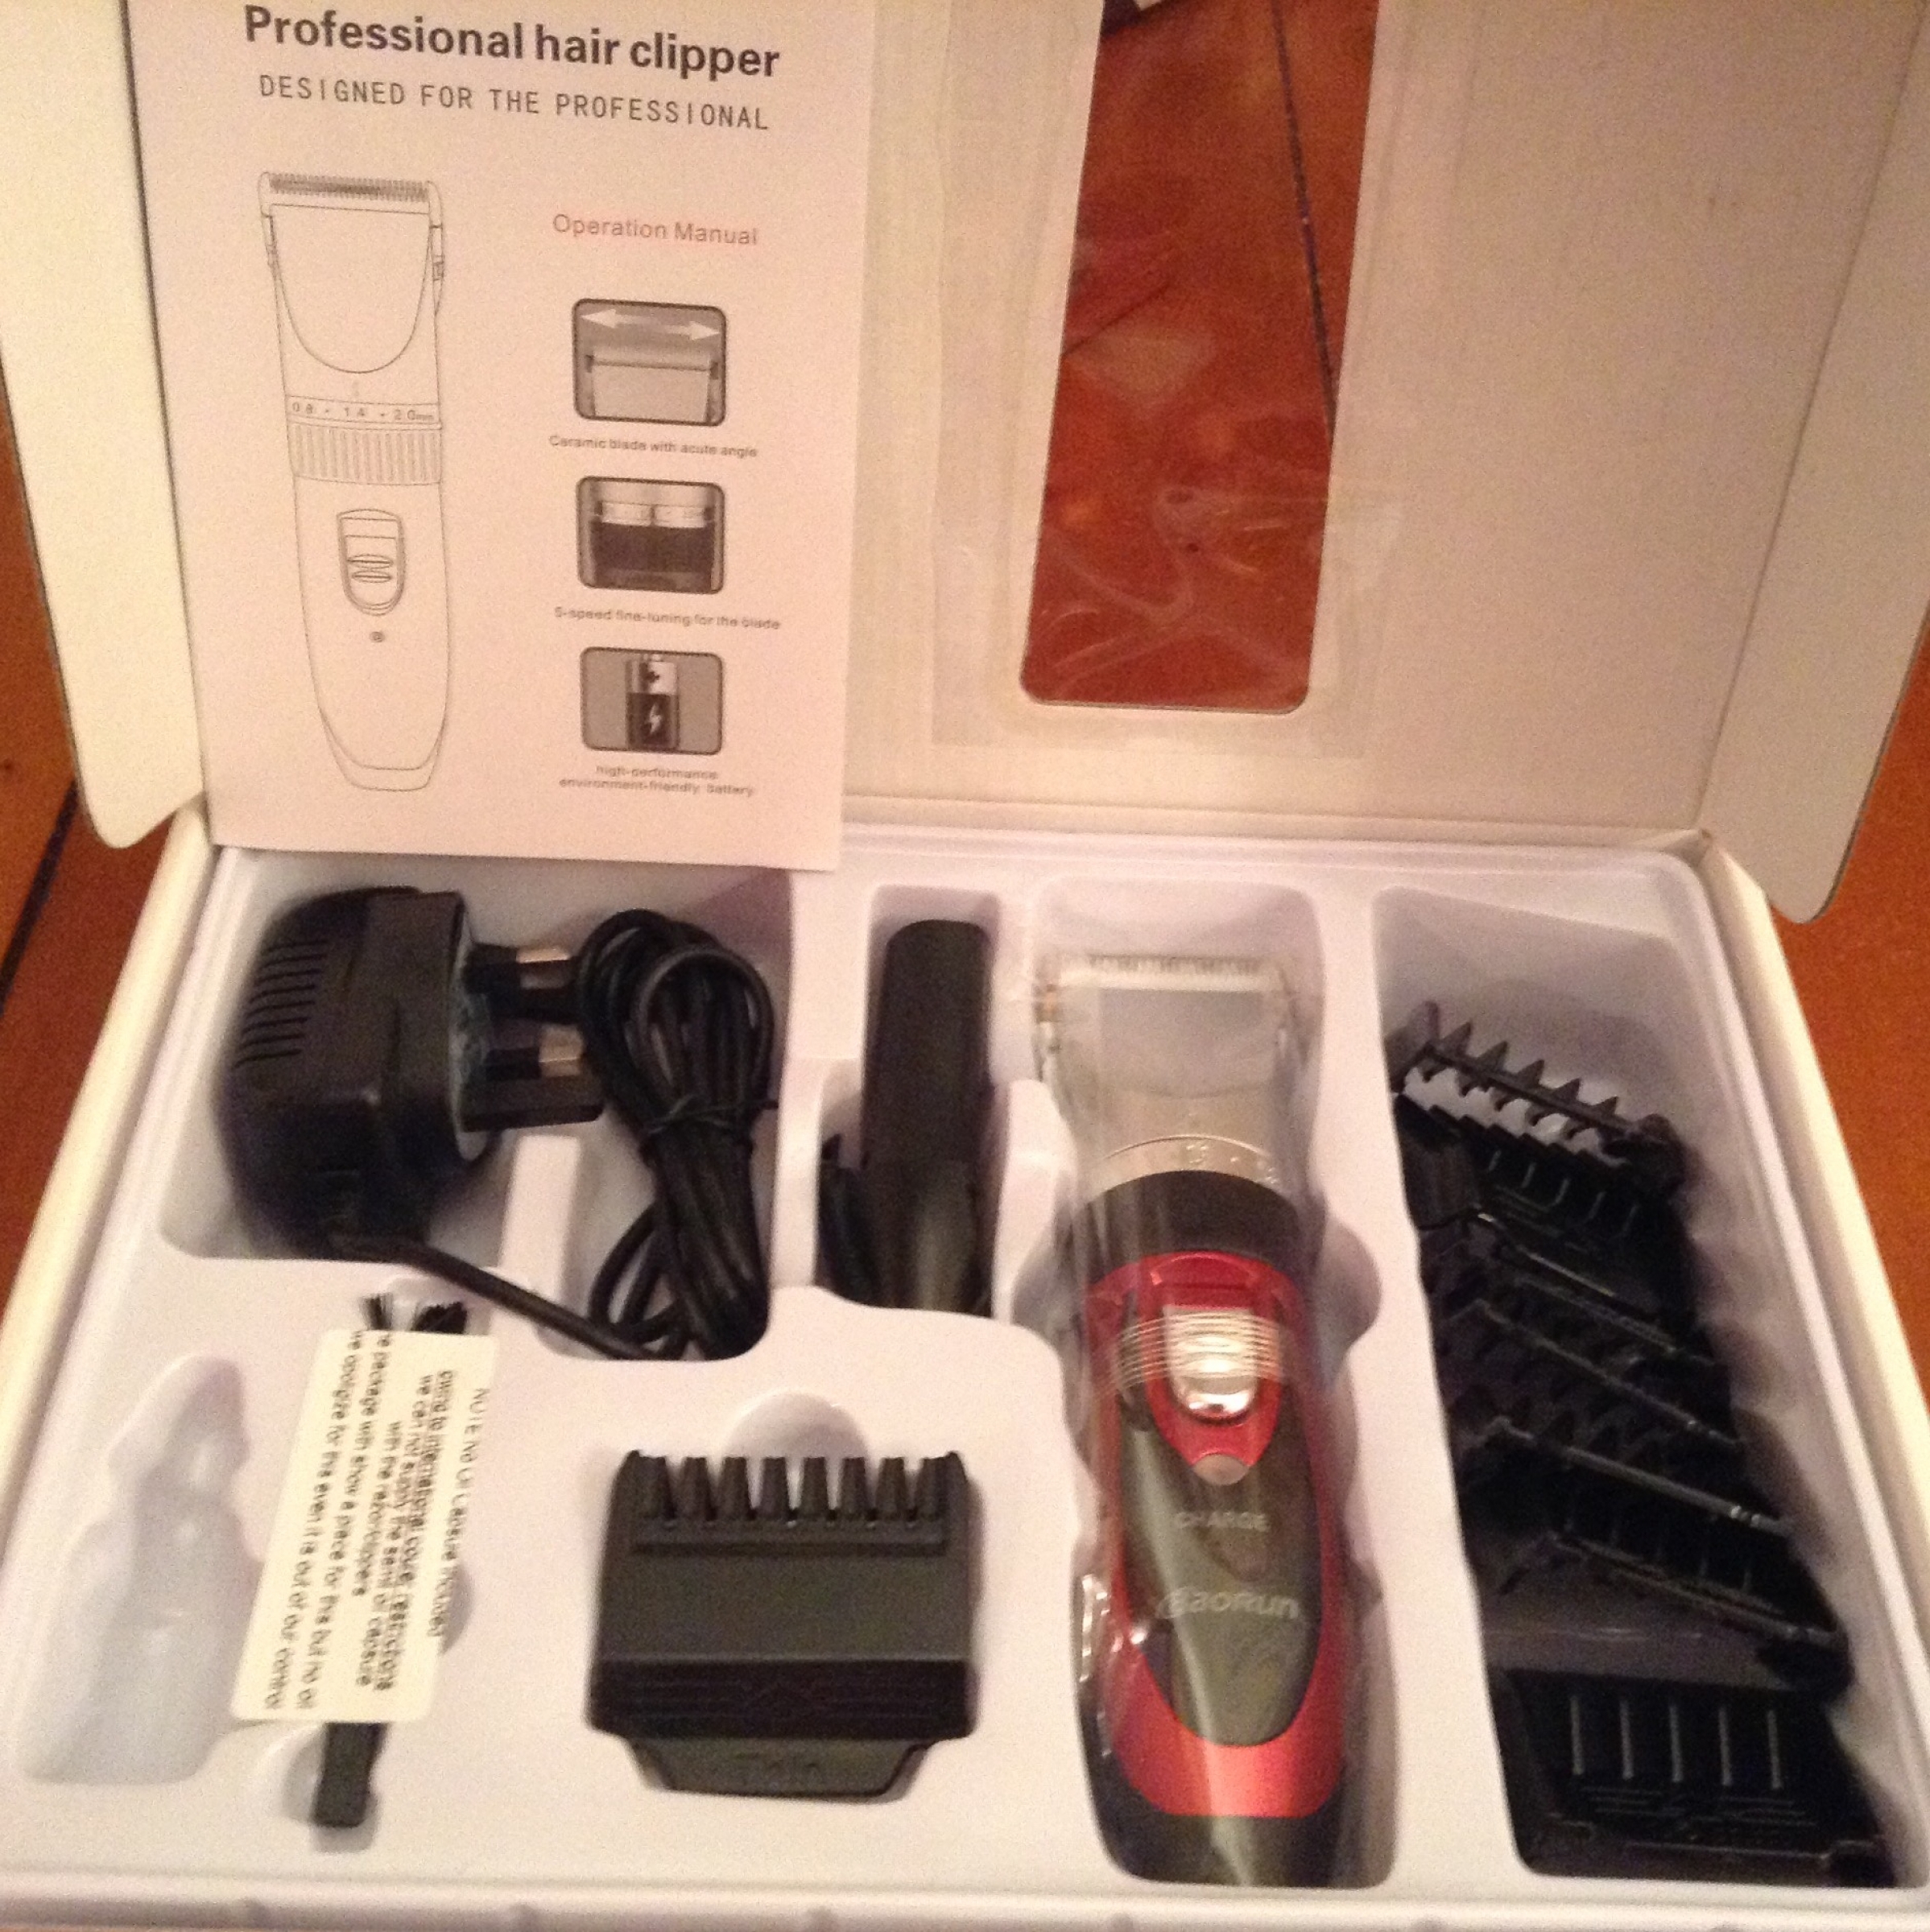 A rechargeable cordless electric hair trimmer